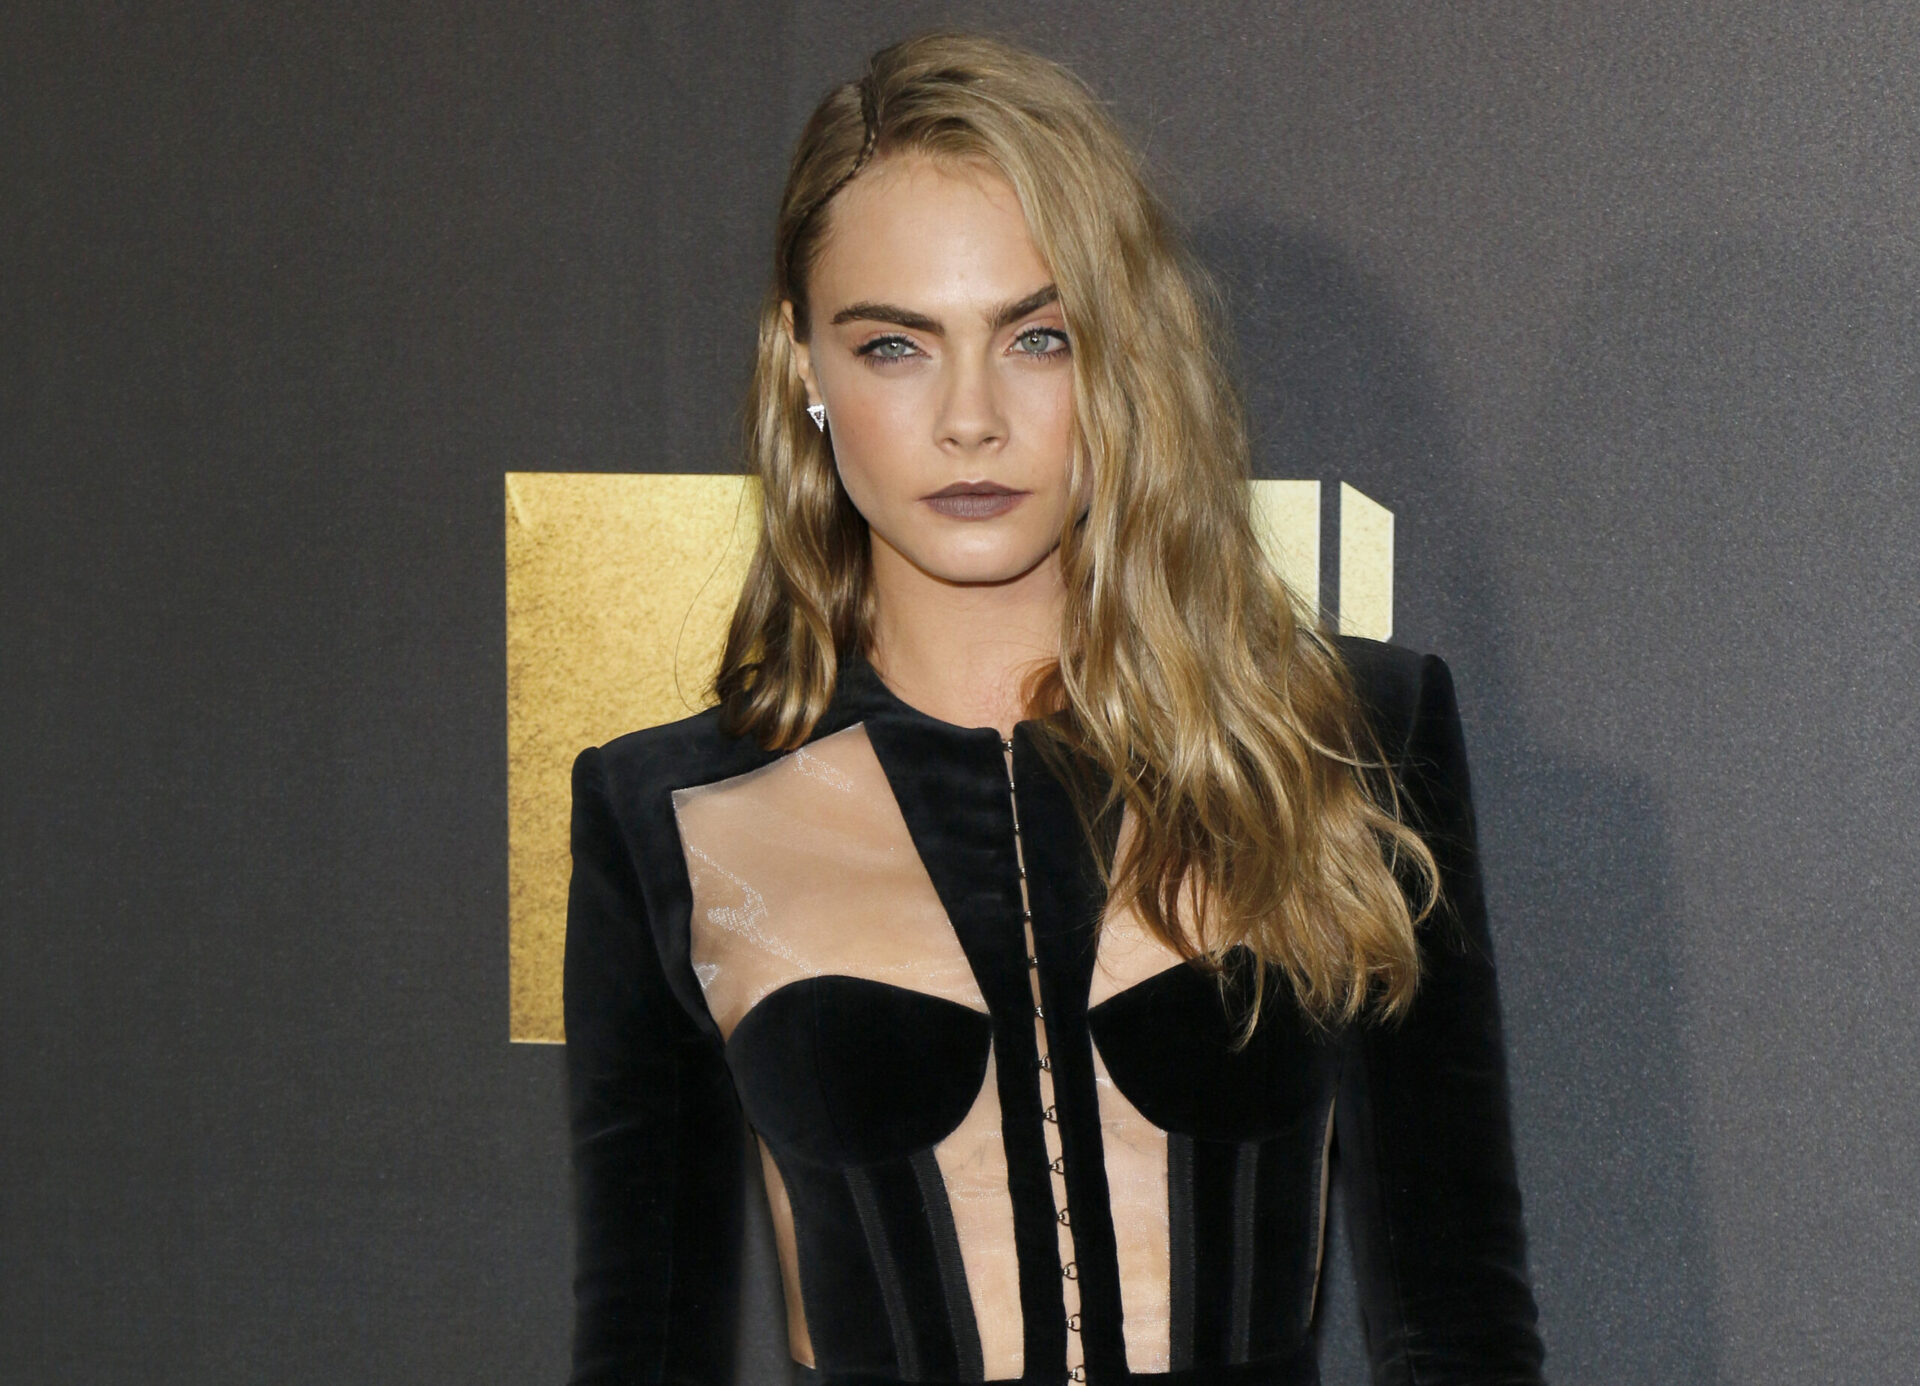 Cara Delevingne opened up about her sobriety at age 30 in an interview with Vogue.